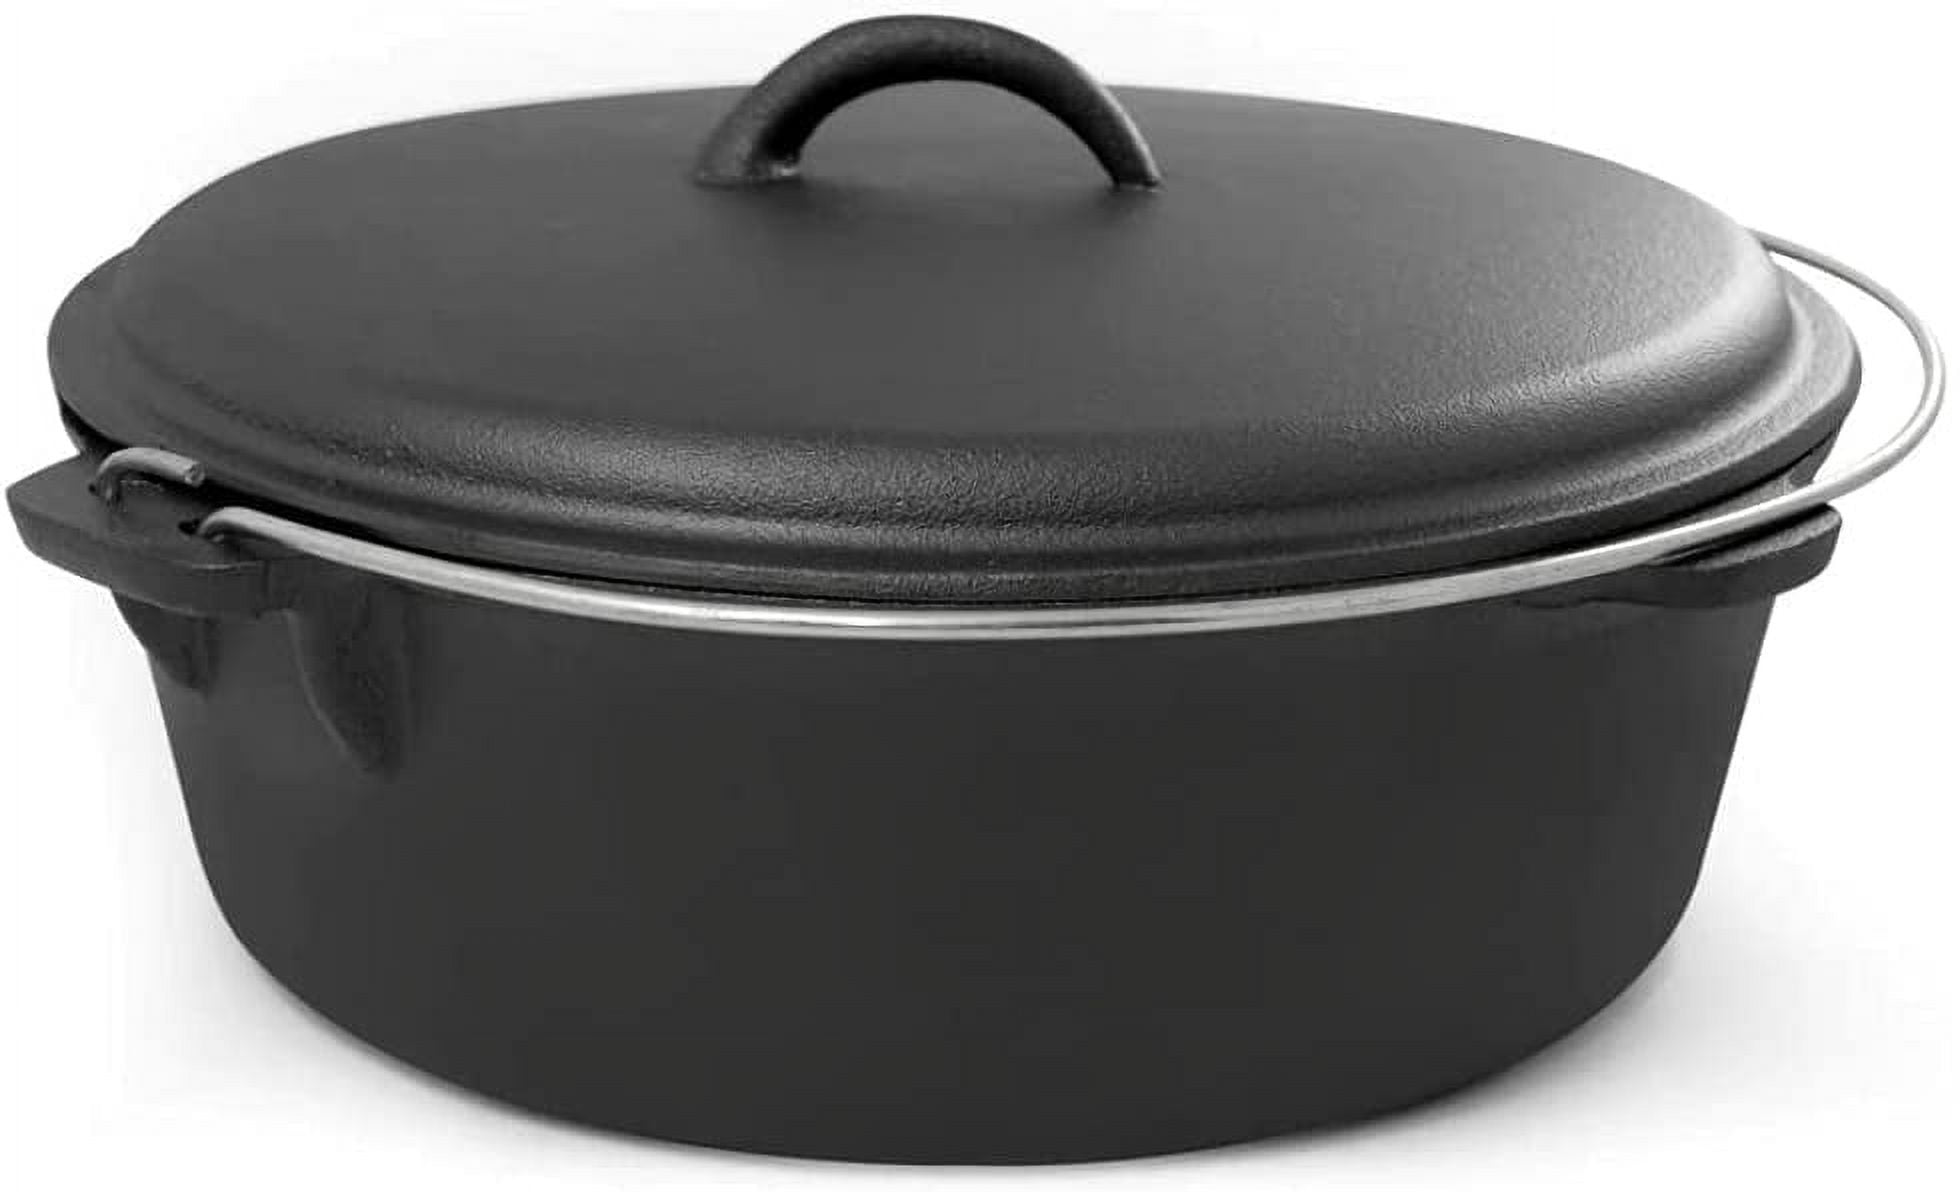 Cast Iron Dutch Oven with Lid-6 Quart Enamel Coated Pot for Oven or  Stovetop Soup Stew, 1 unit - Kroger